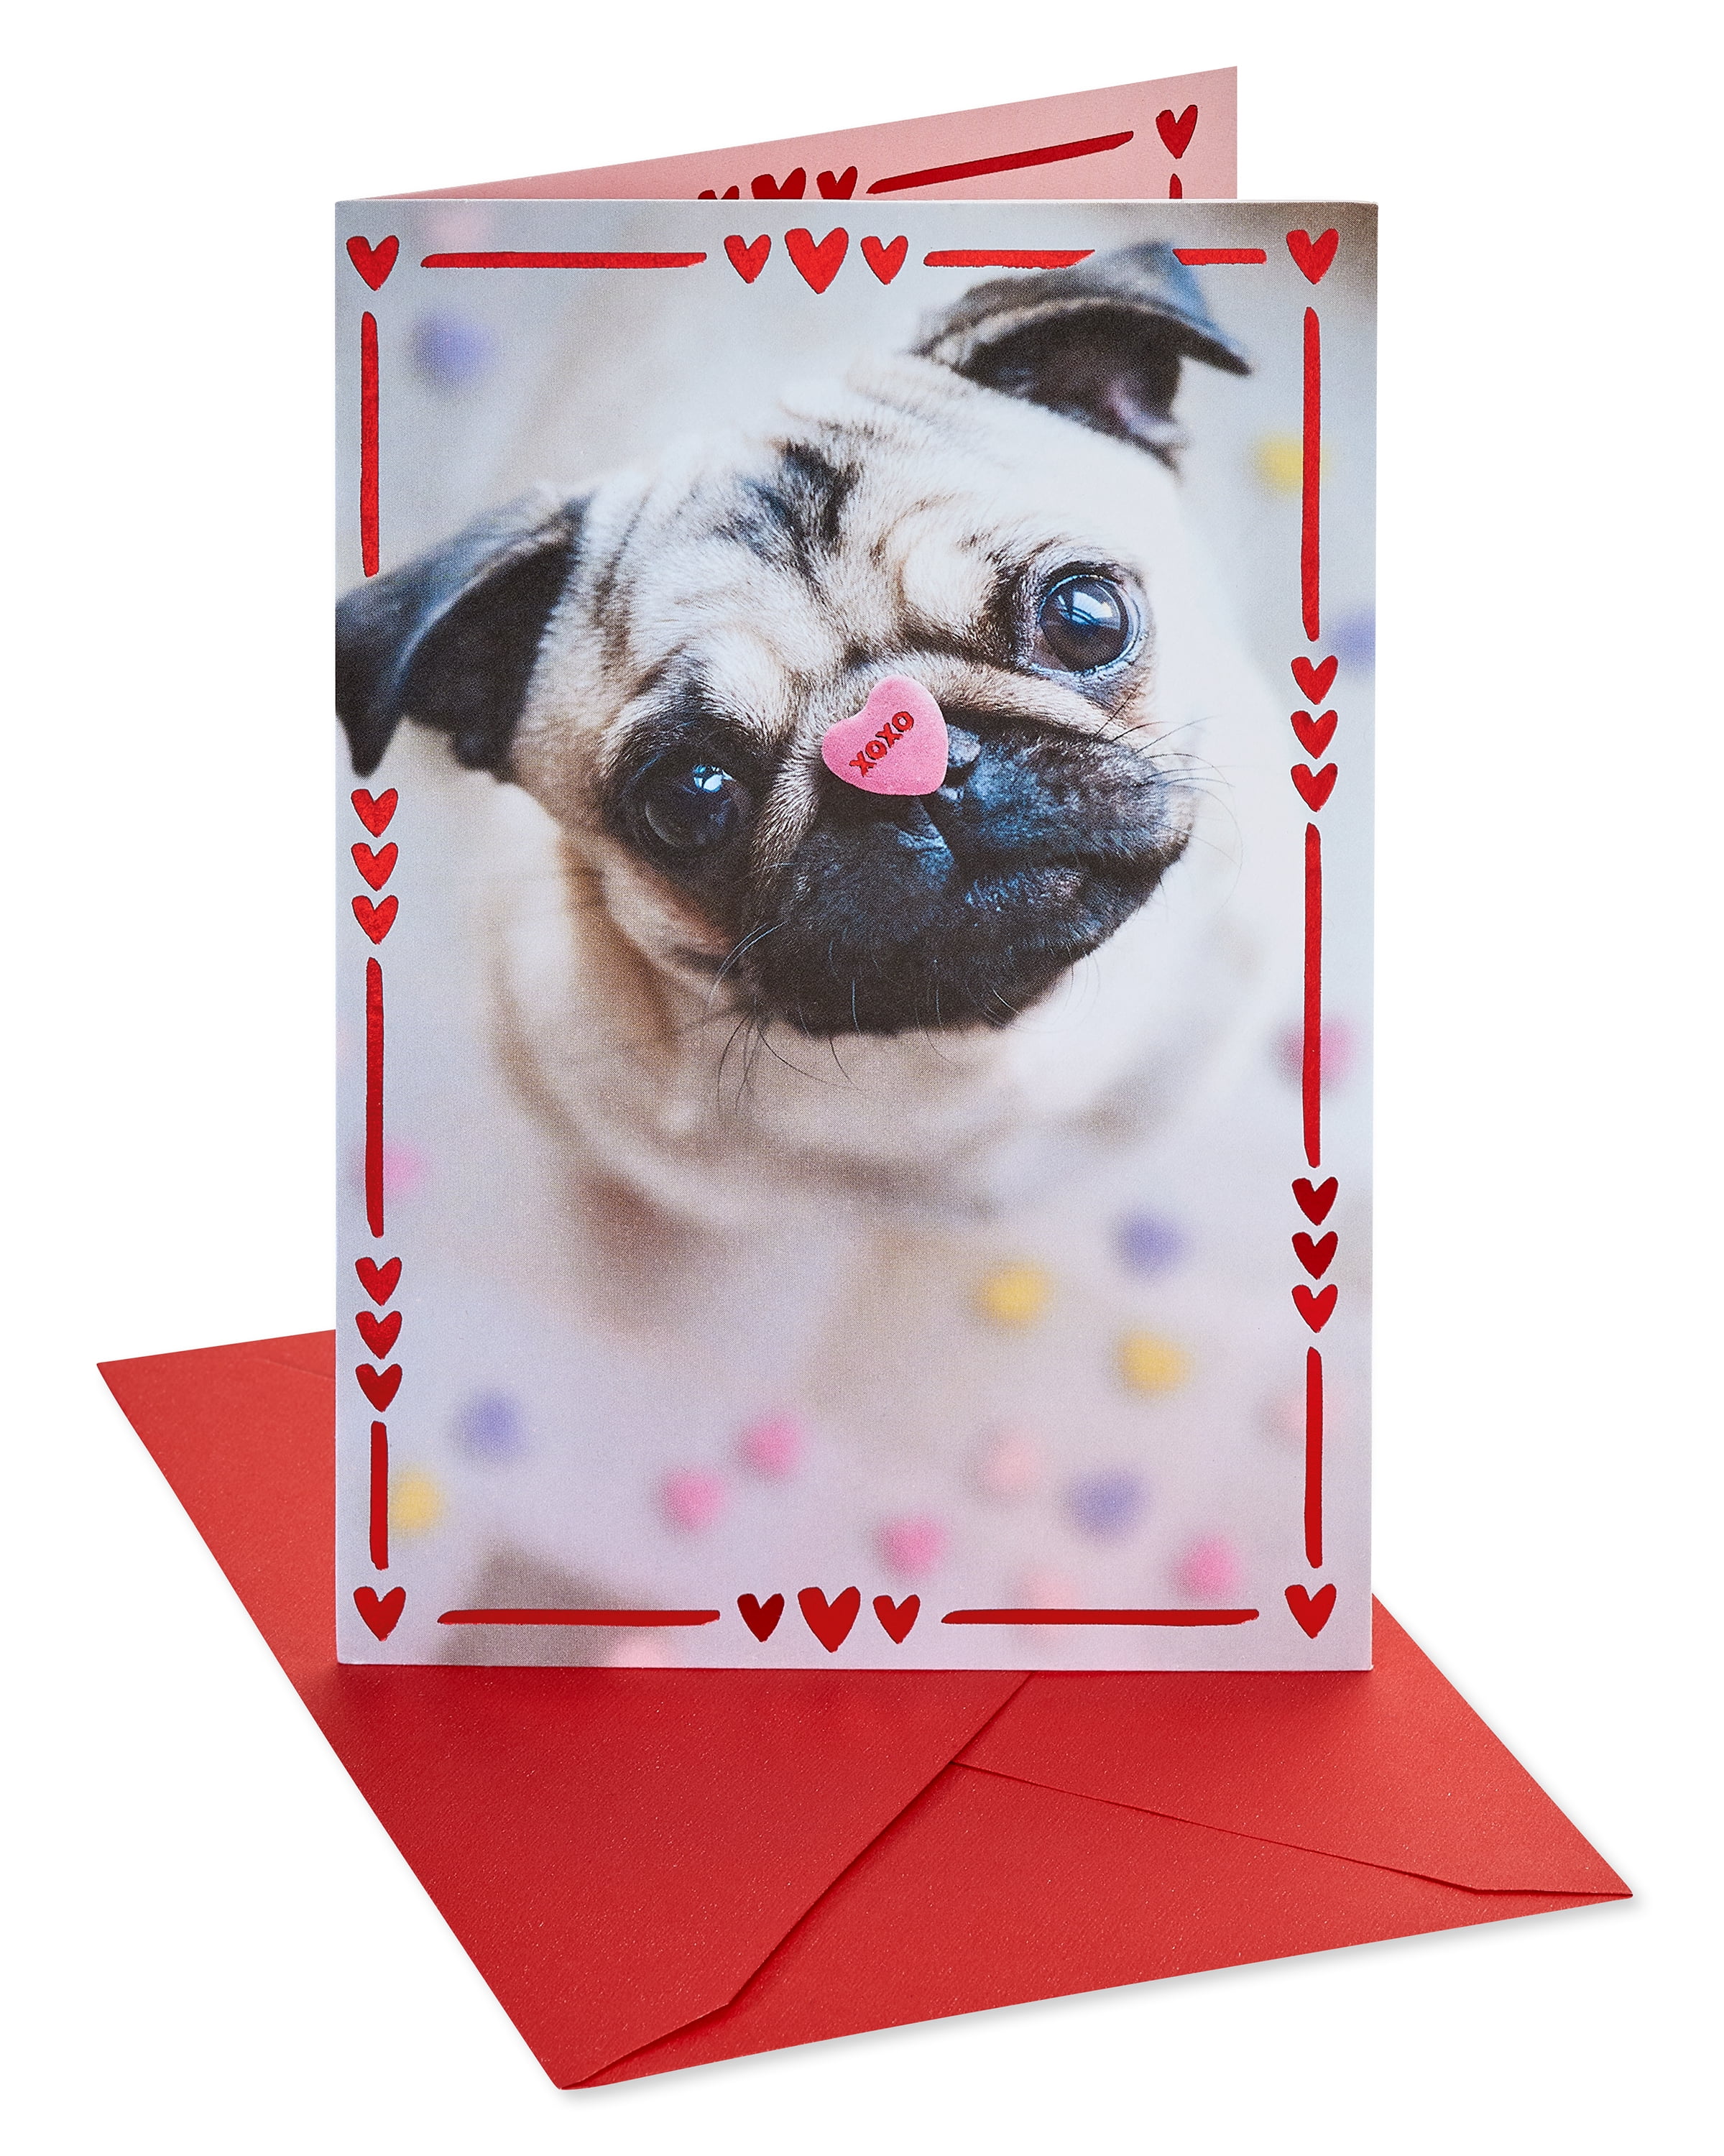 American Greetings Valentine's Day Card (Pug with Candy Heart)